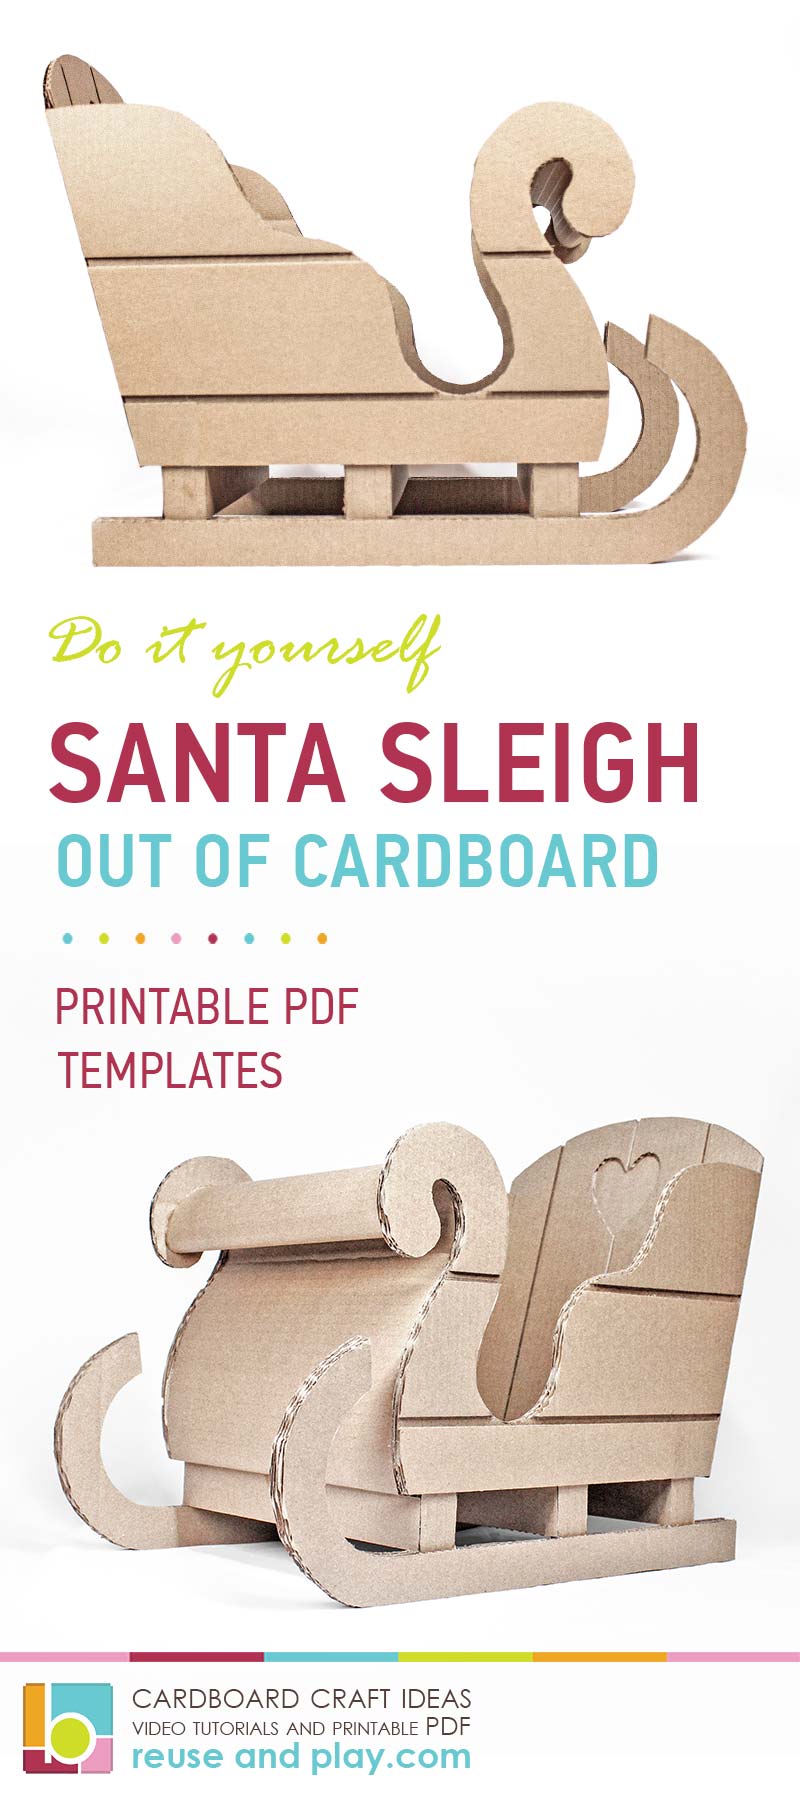 How to make Cardboard Santa Sleigh set of Templates and PDF Tutorial with Pattern